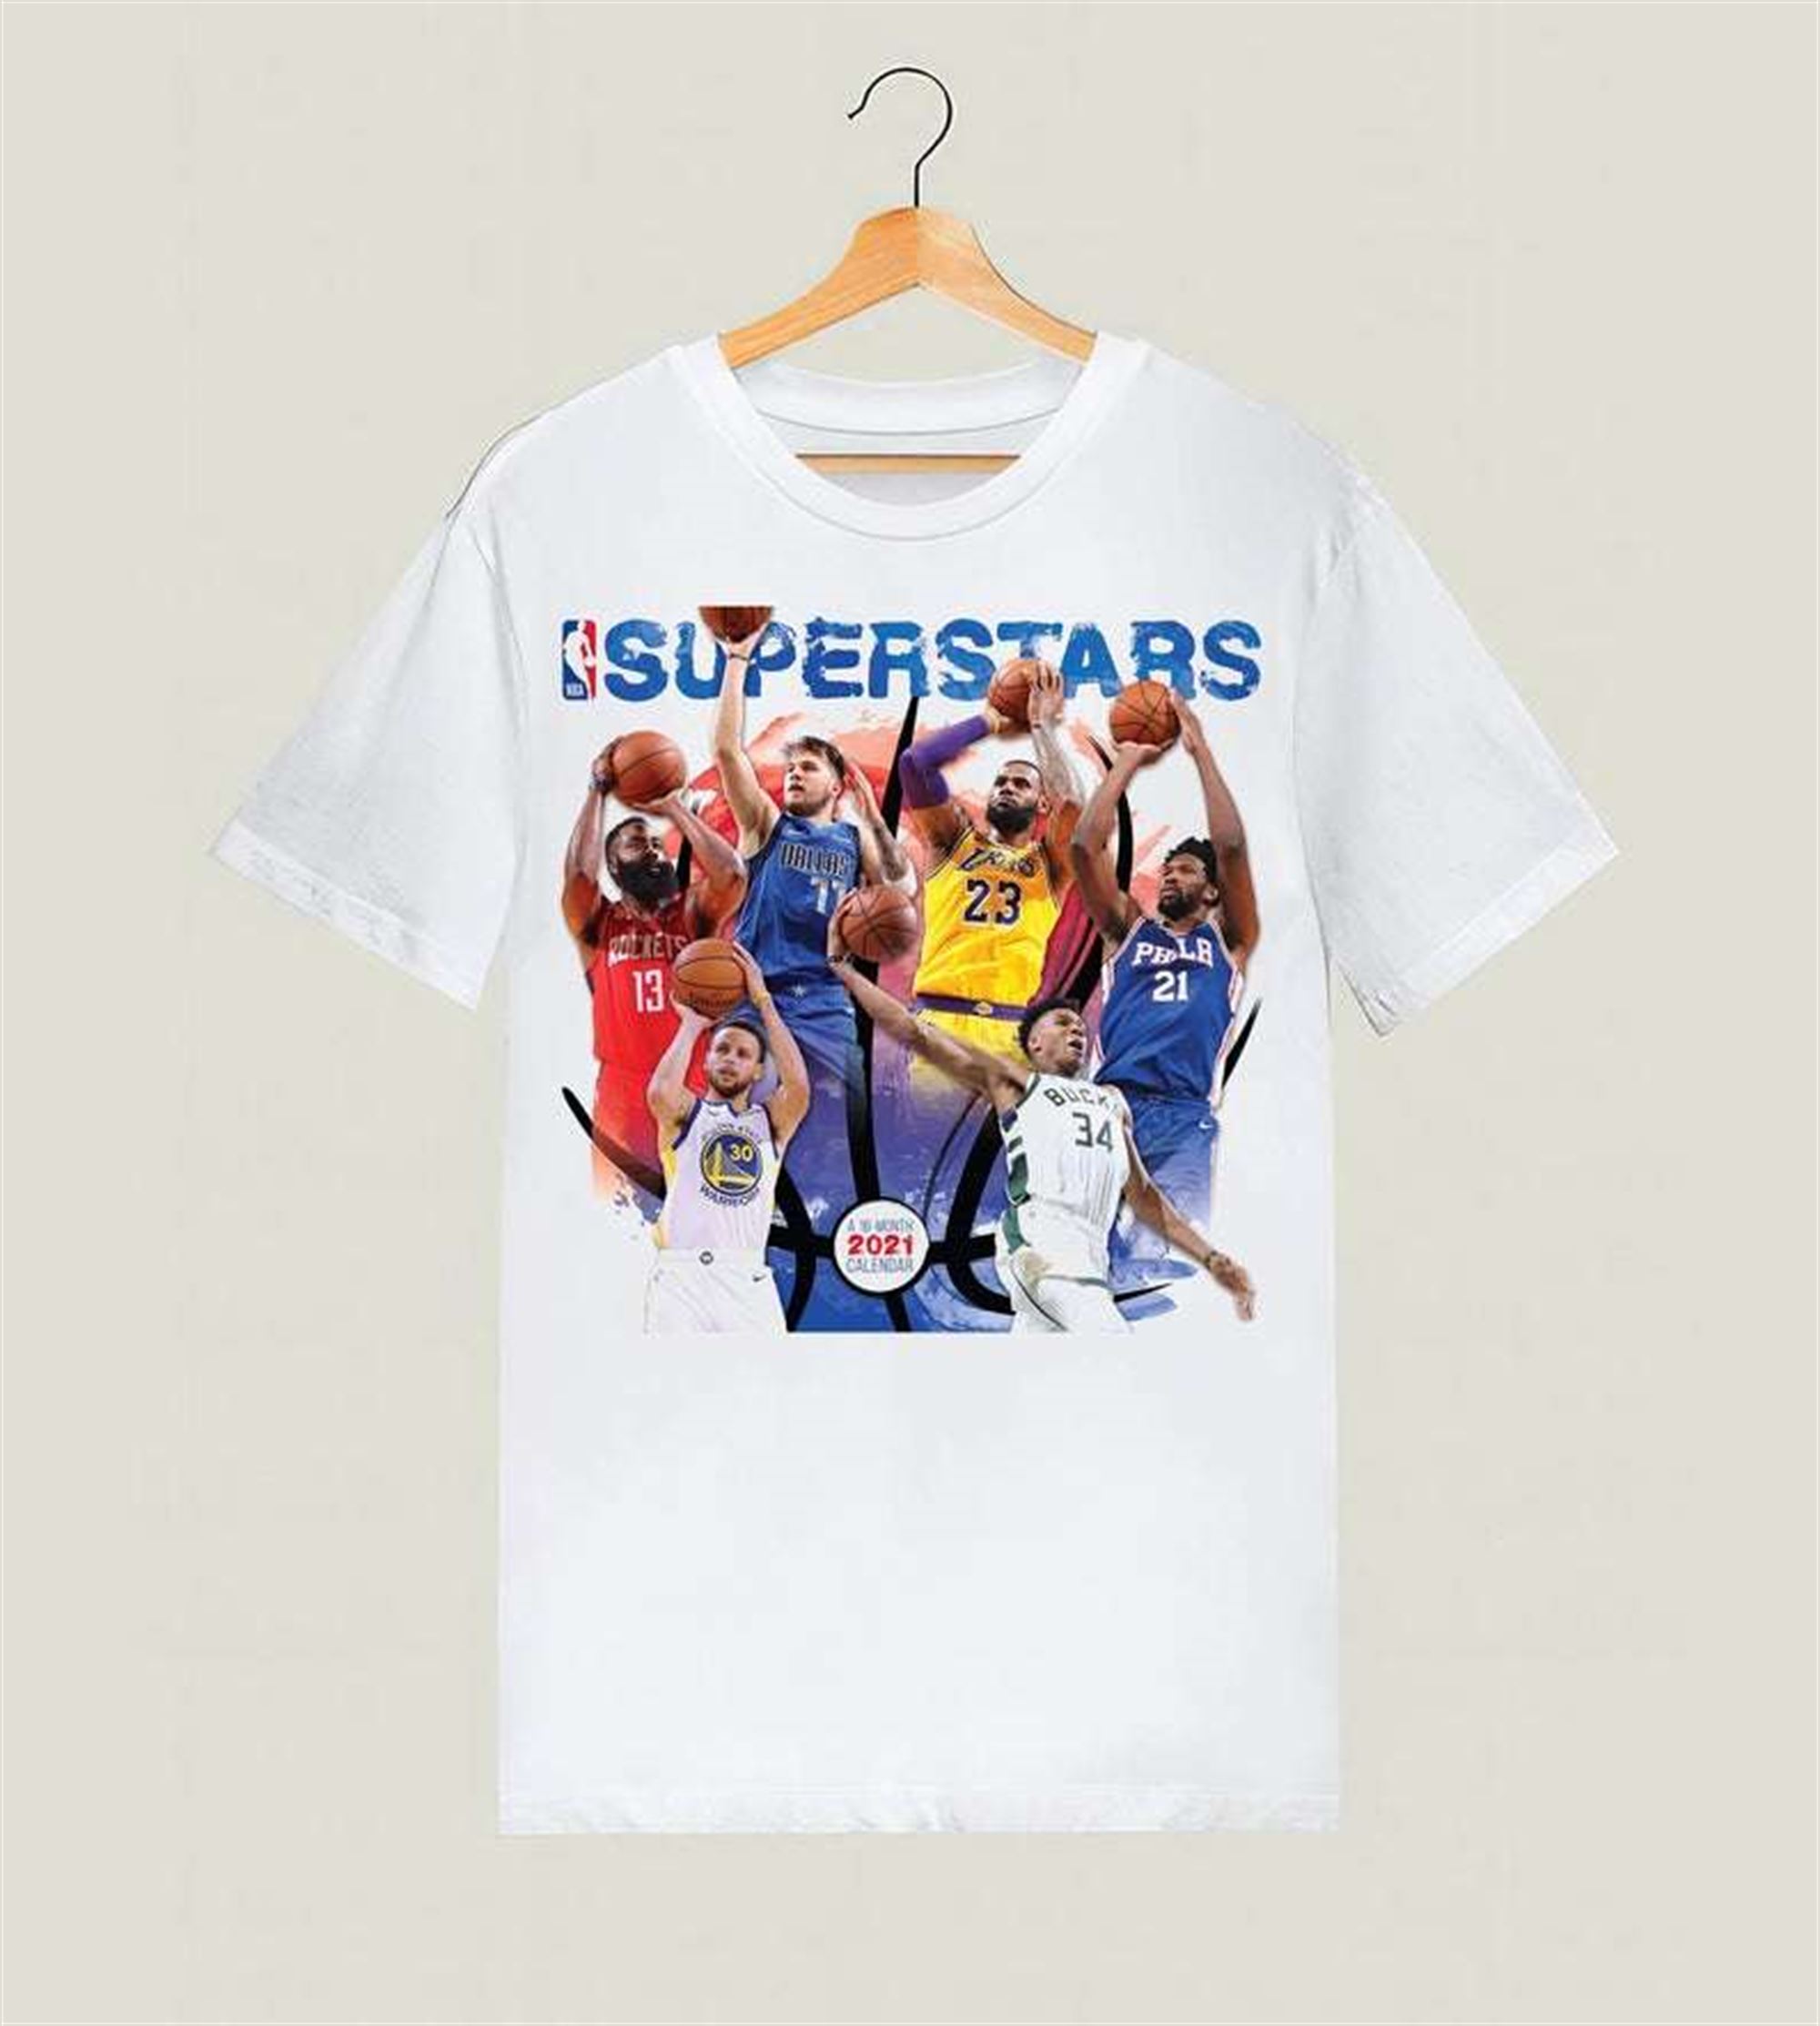 All Super Stars Of Nba 2021 Unisex T Shirt Full Size Up To 5xl